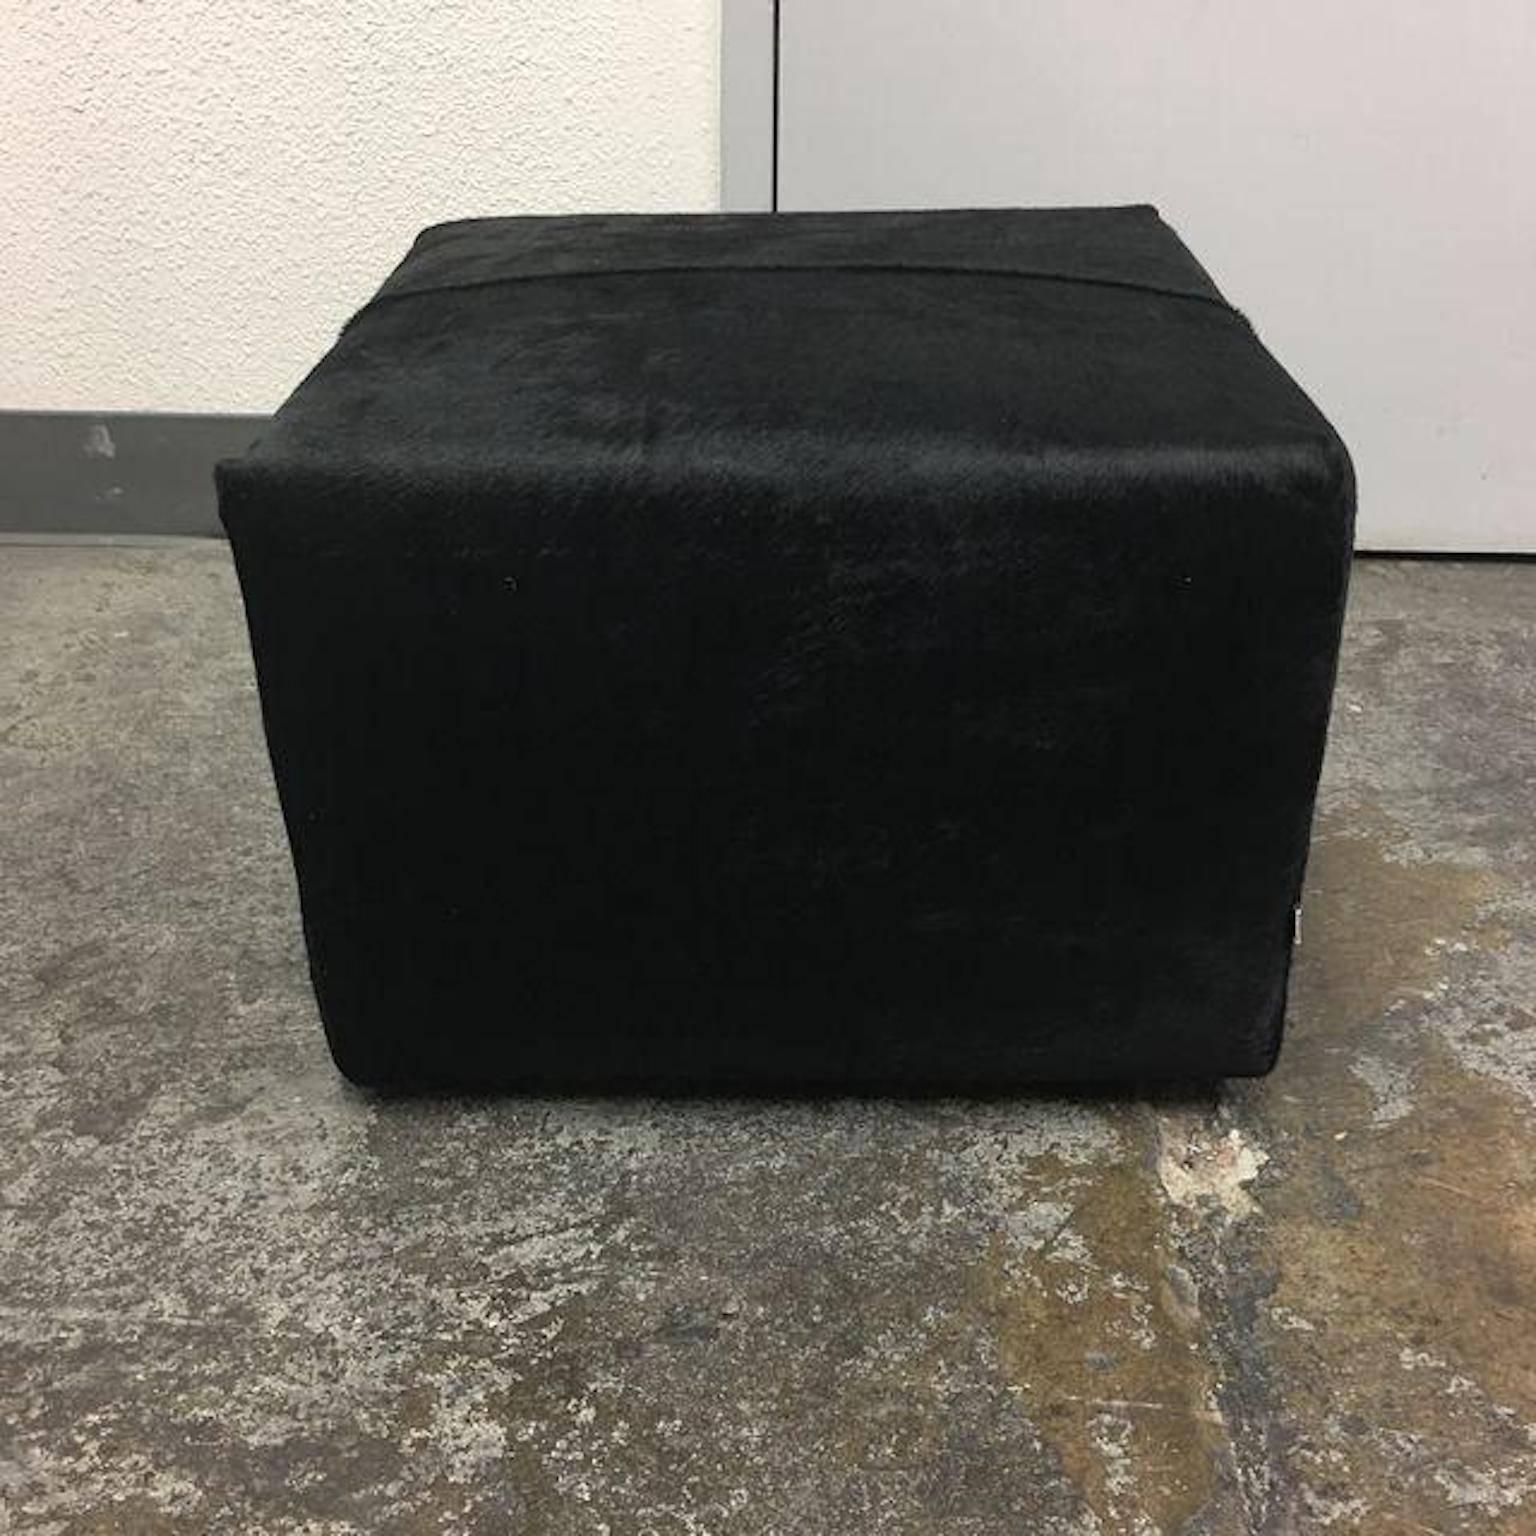 A P60 black leather cowhide ottoman for B&B Italia. Designed by Antonio Citterio. An ottoman with wheels, to be used everywhere as an additional seat or as a service element placed by tables, writing desks and shelves. The upholstery is a black